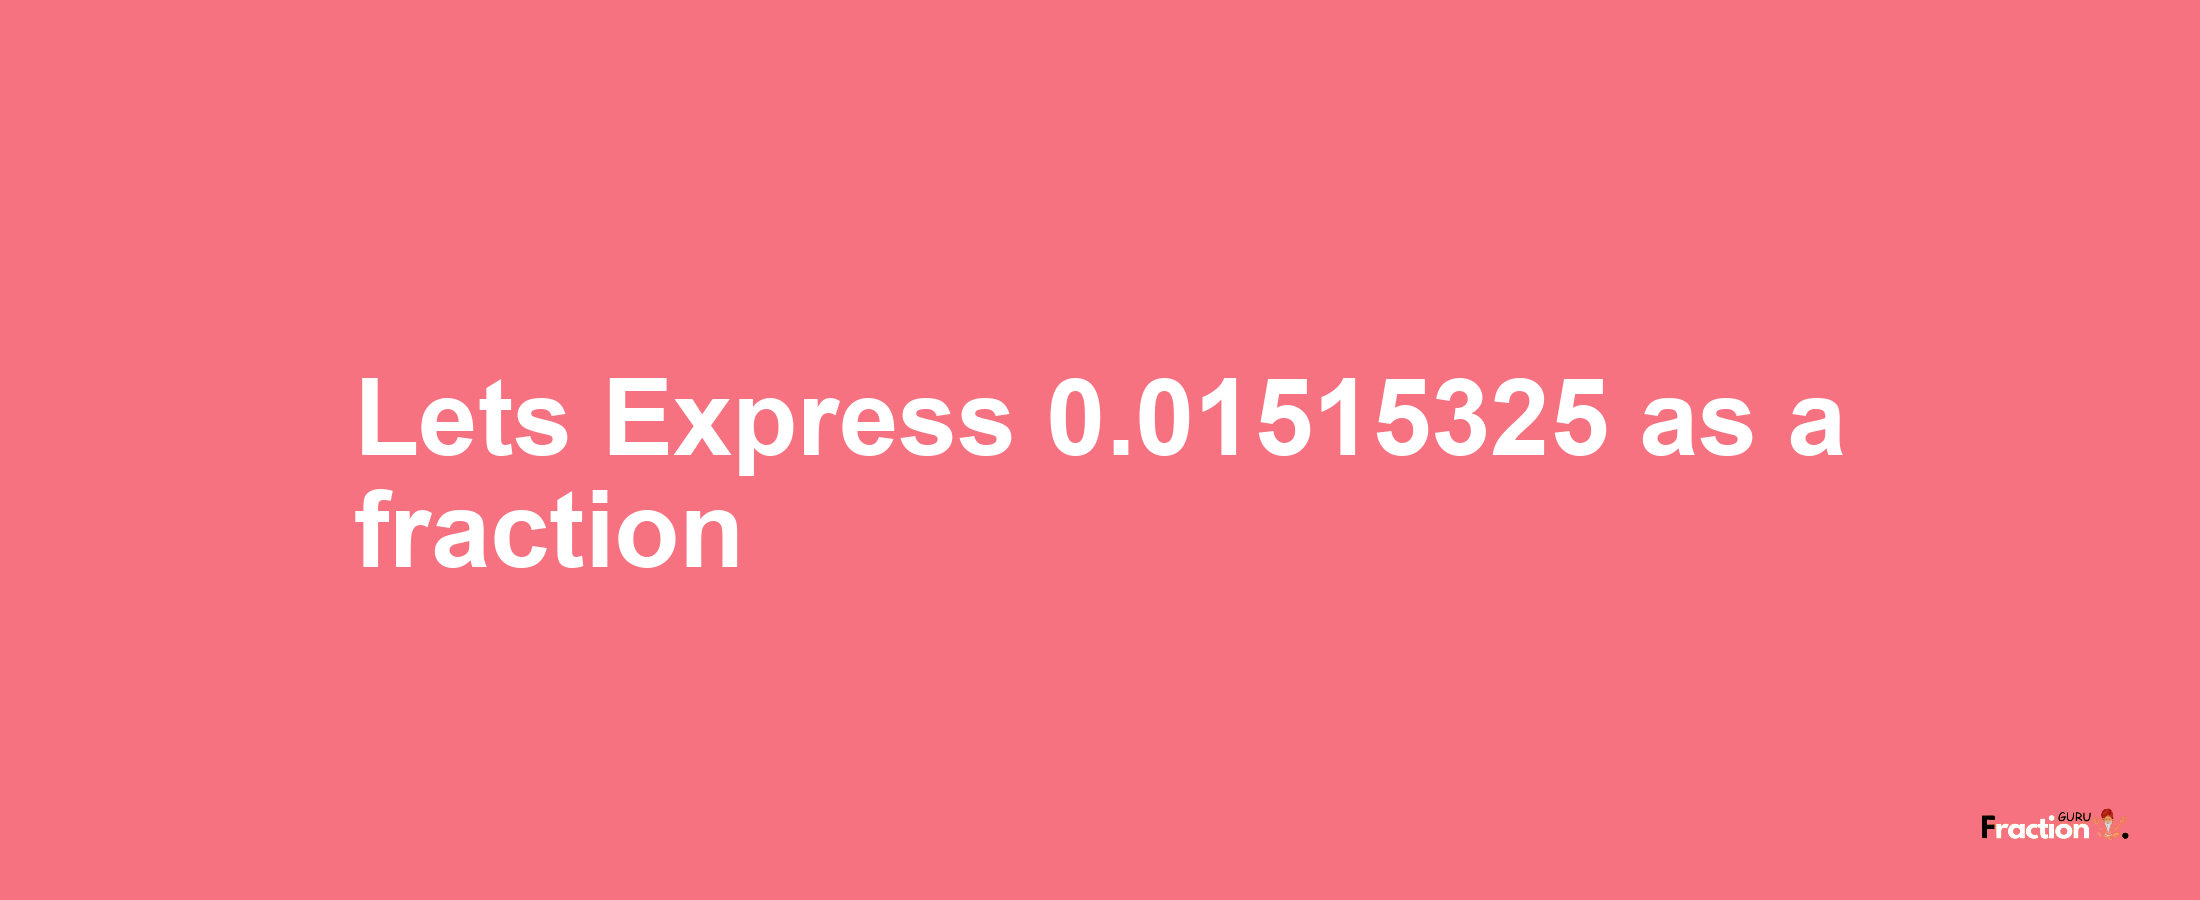 Lets Express 0.01515325 as afraction